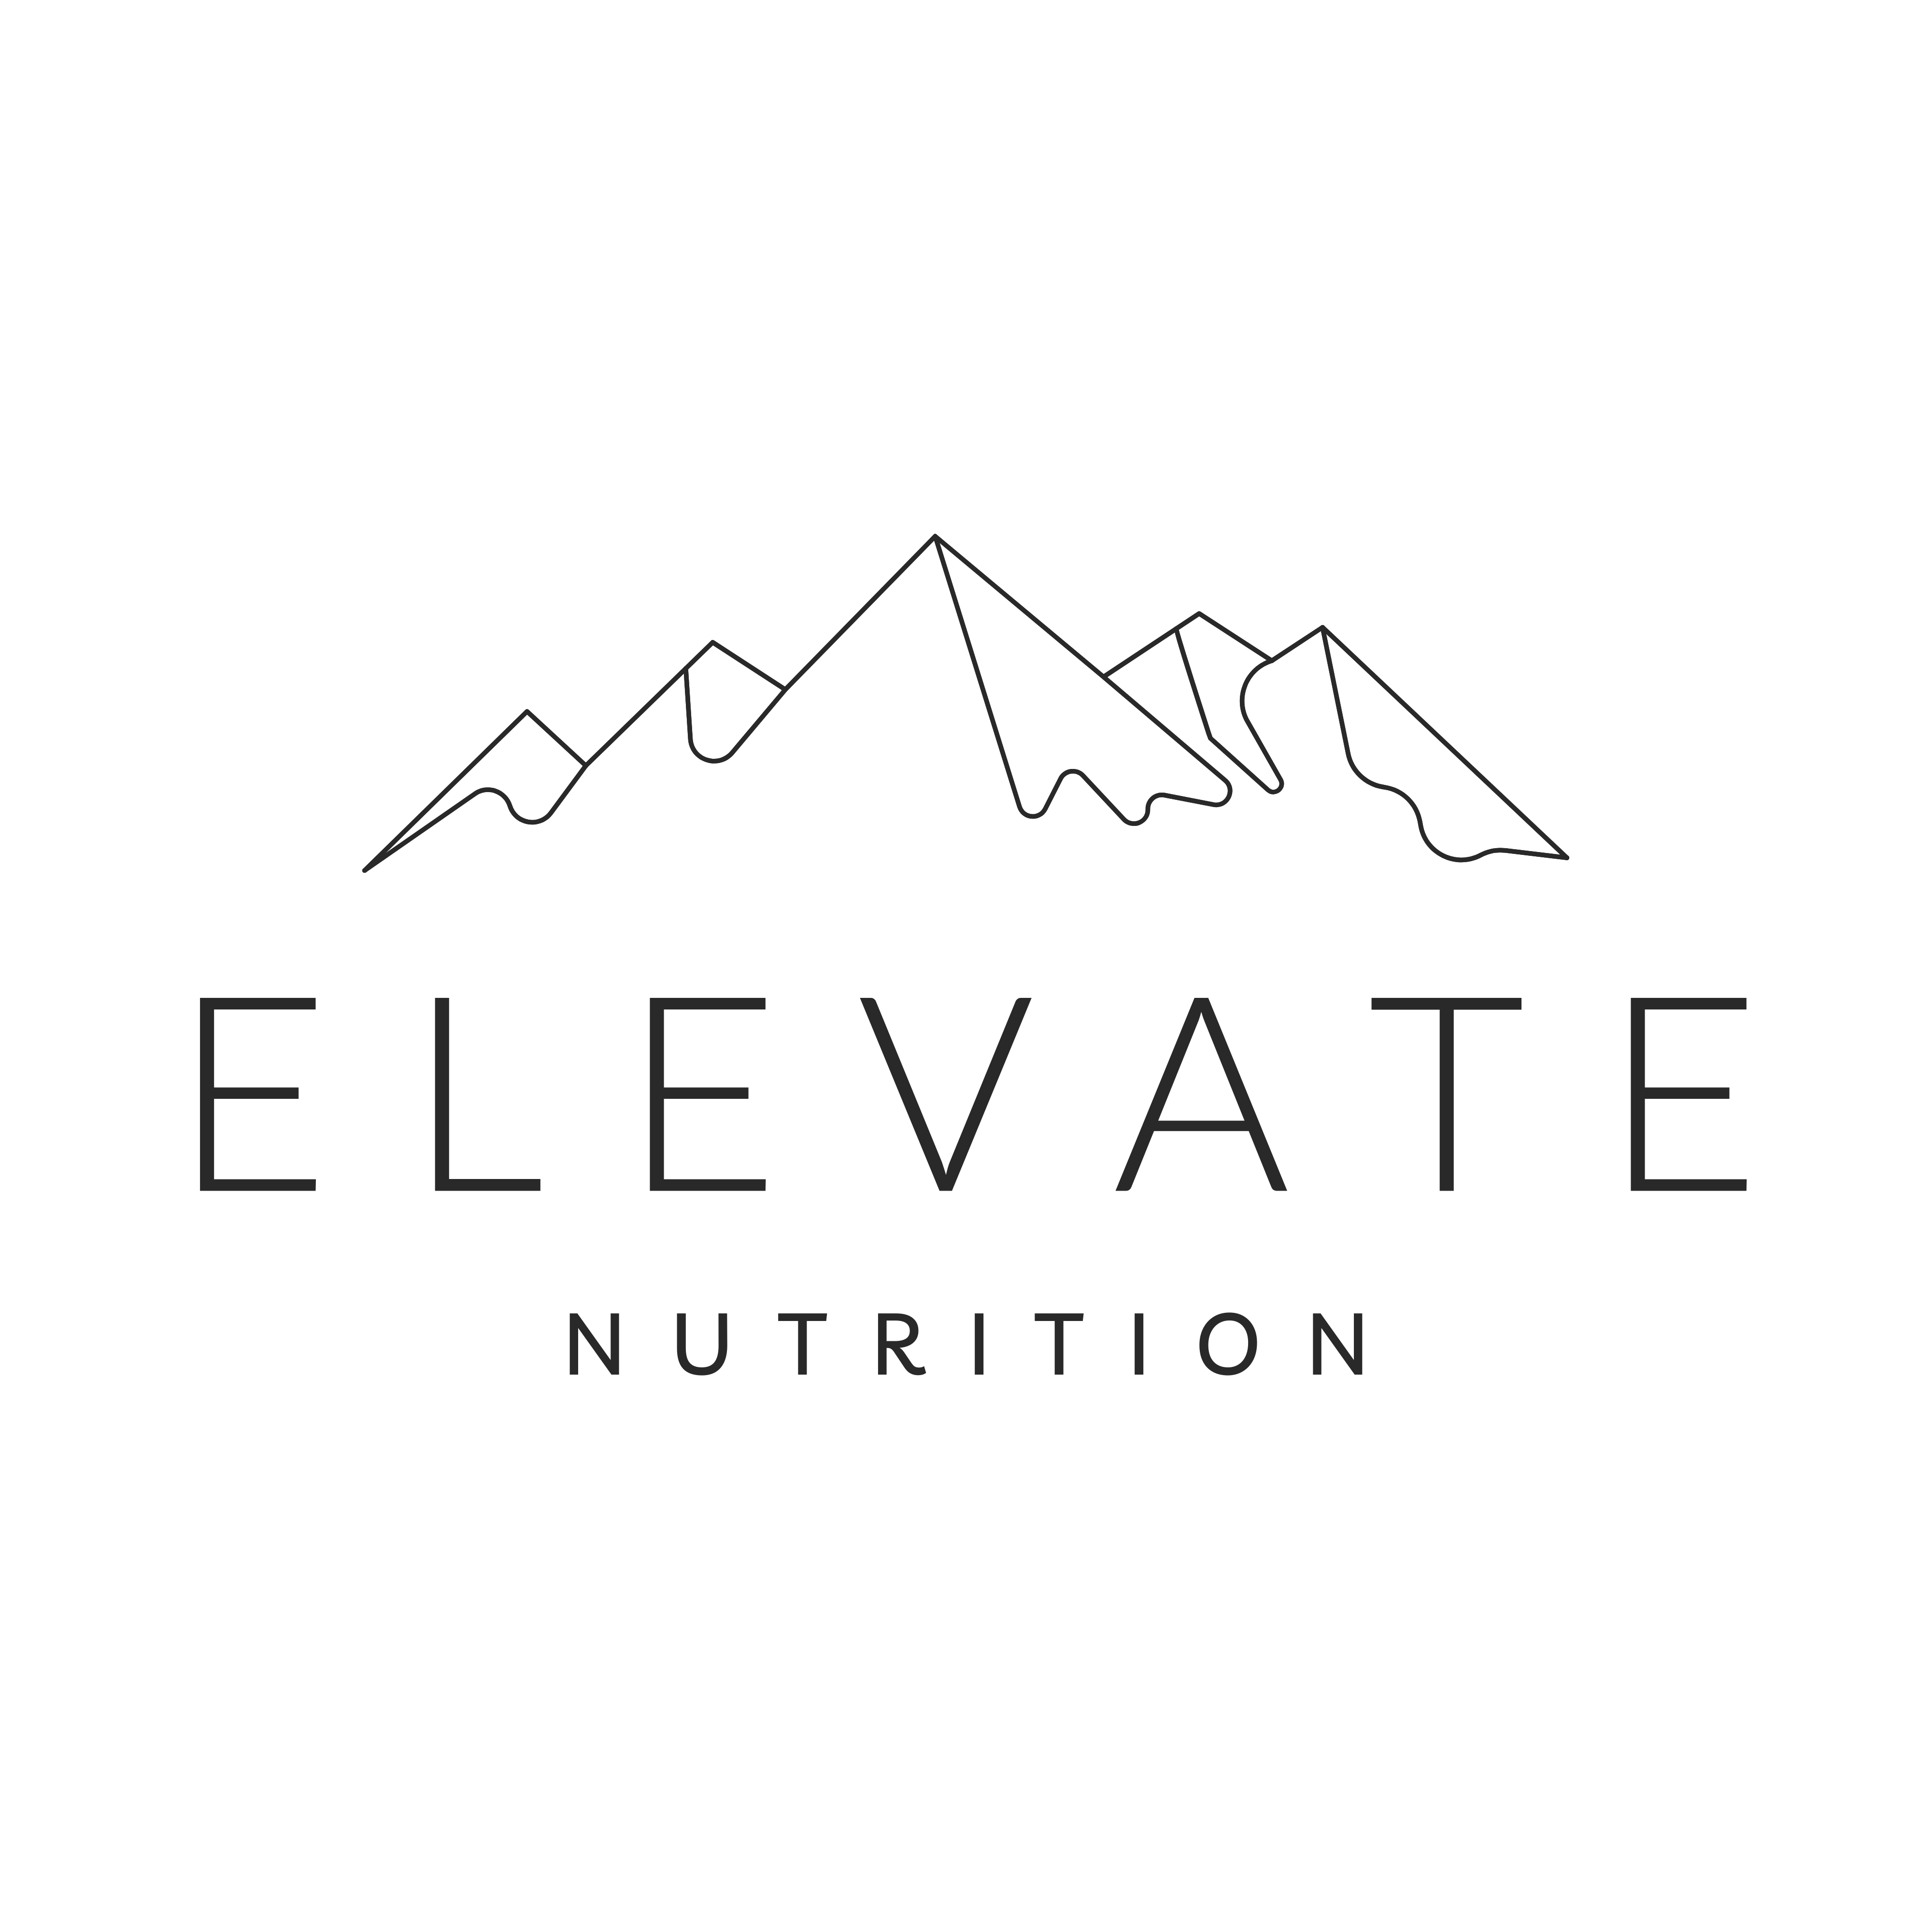 ELEVATE NUTRITION